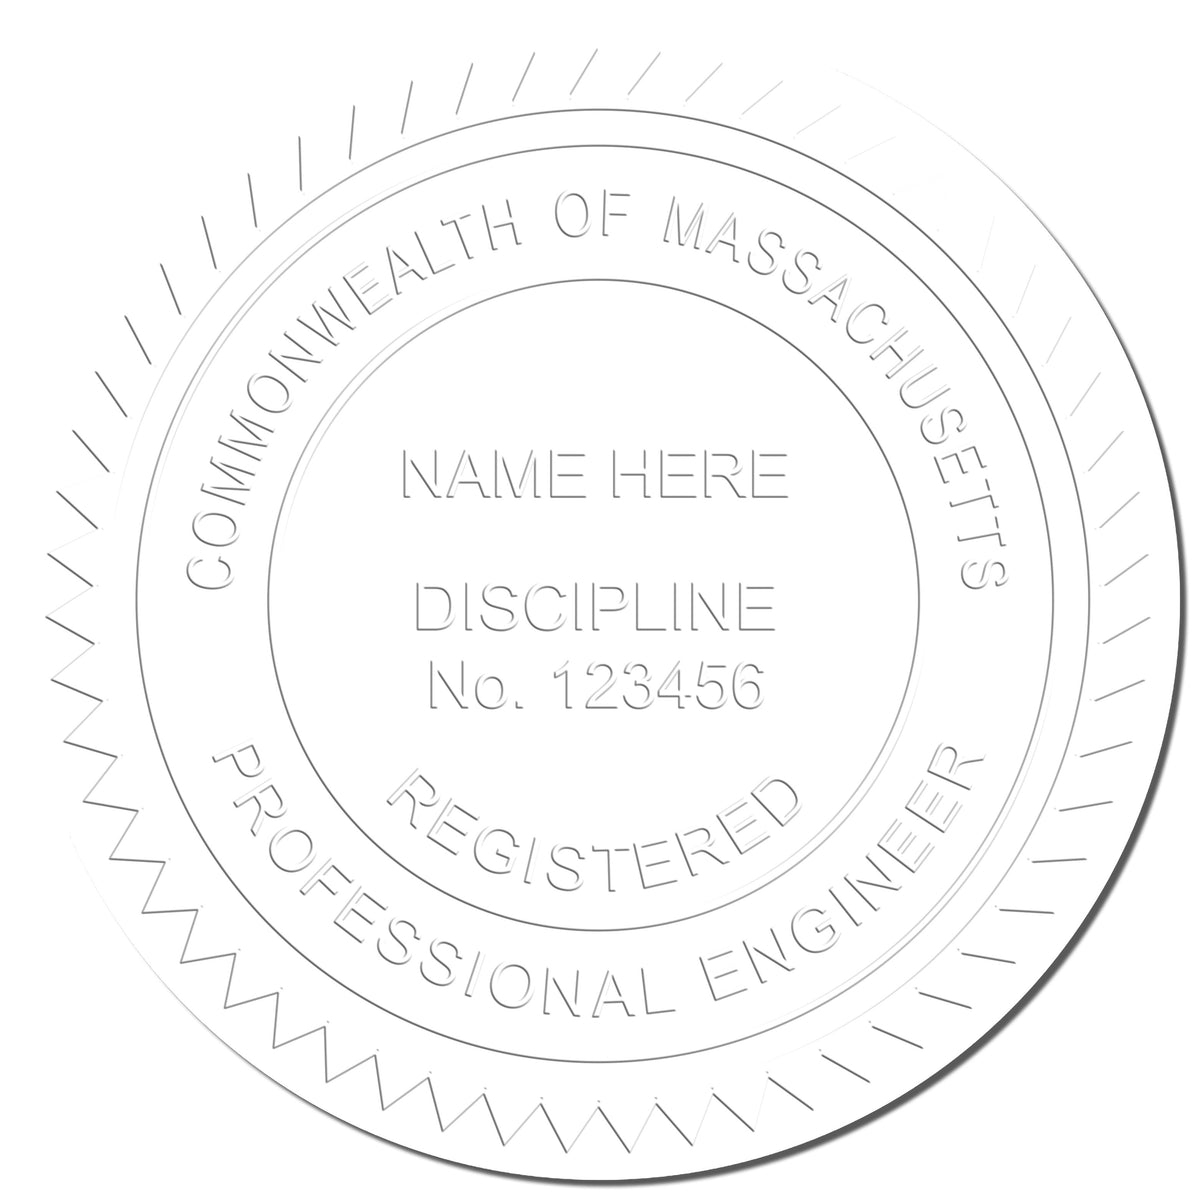 This paper is stamped with a sample imprint of the Hybrid Massachusetts Engineer Seal, signifying its quality and reliability.